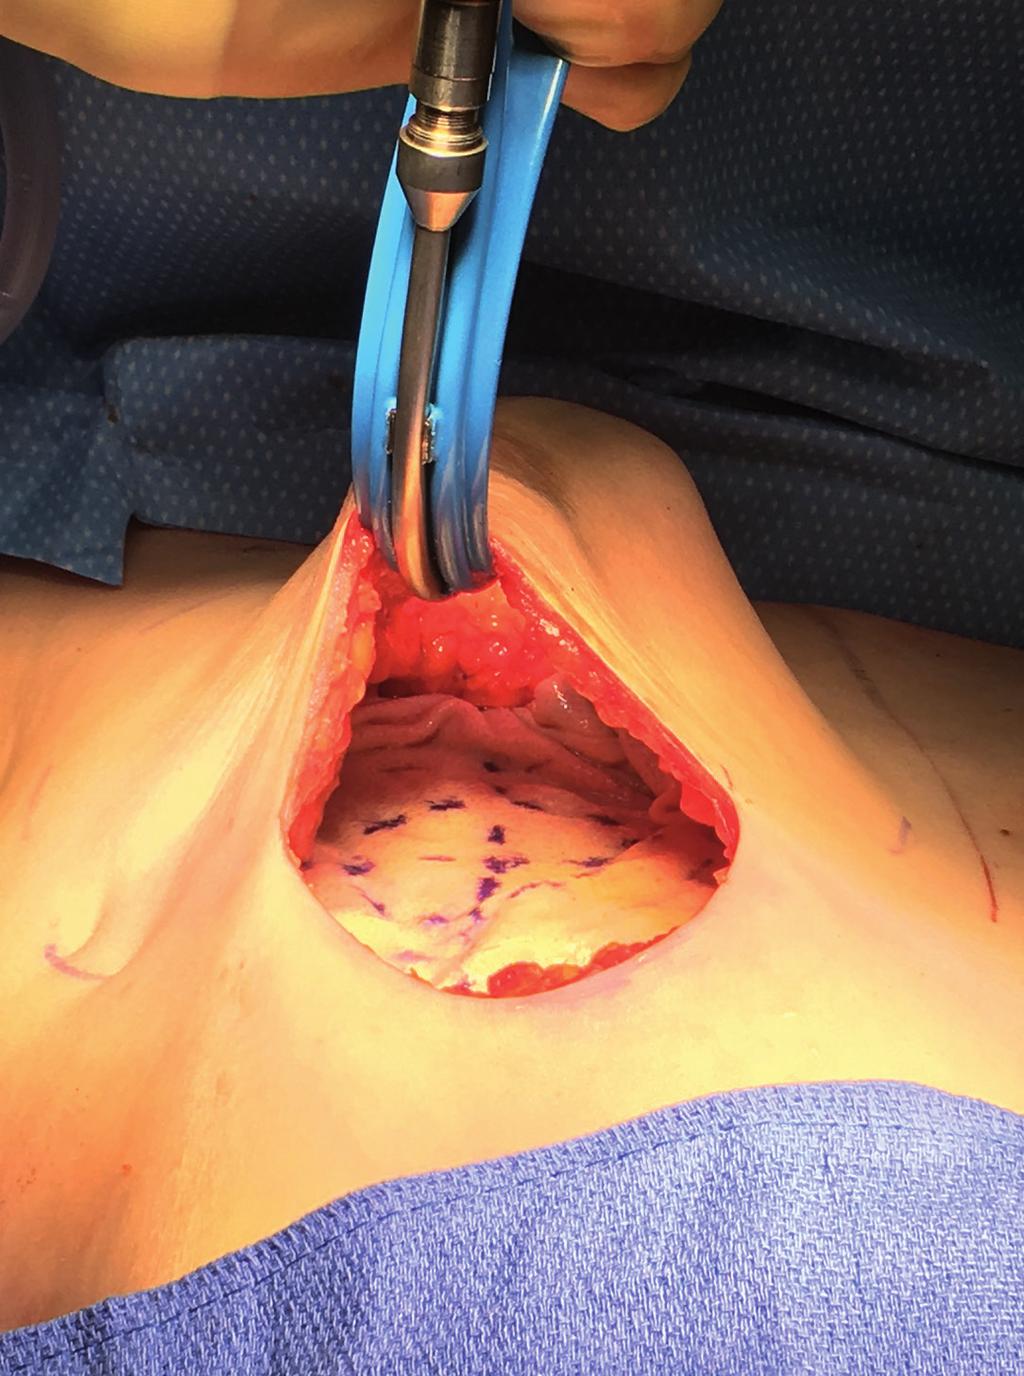 A lighted retractor is then used to expose the pocket up to the top of the pectoralis. Here the top of the breast can be determined by correlating with the preoperative markings.